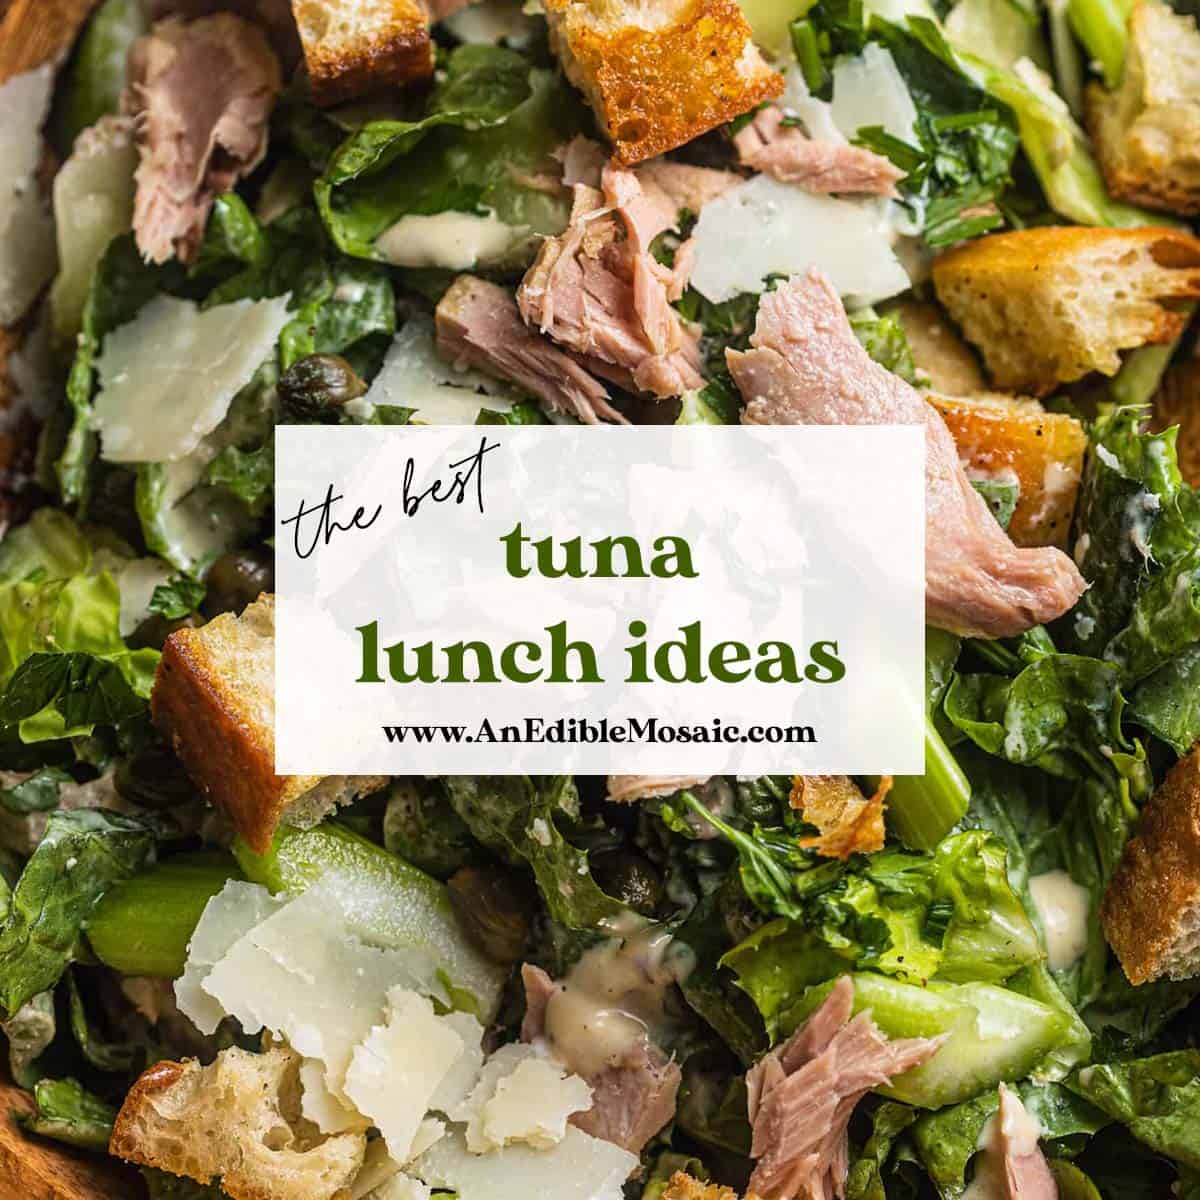 tuna lunch ideas featured image